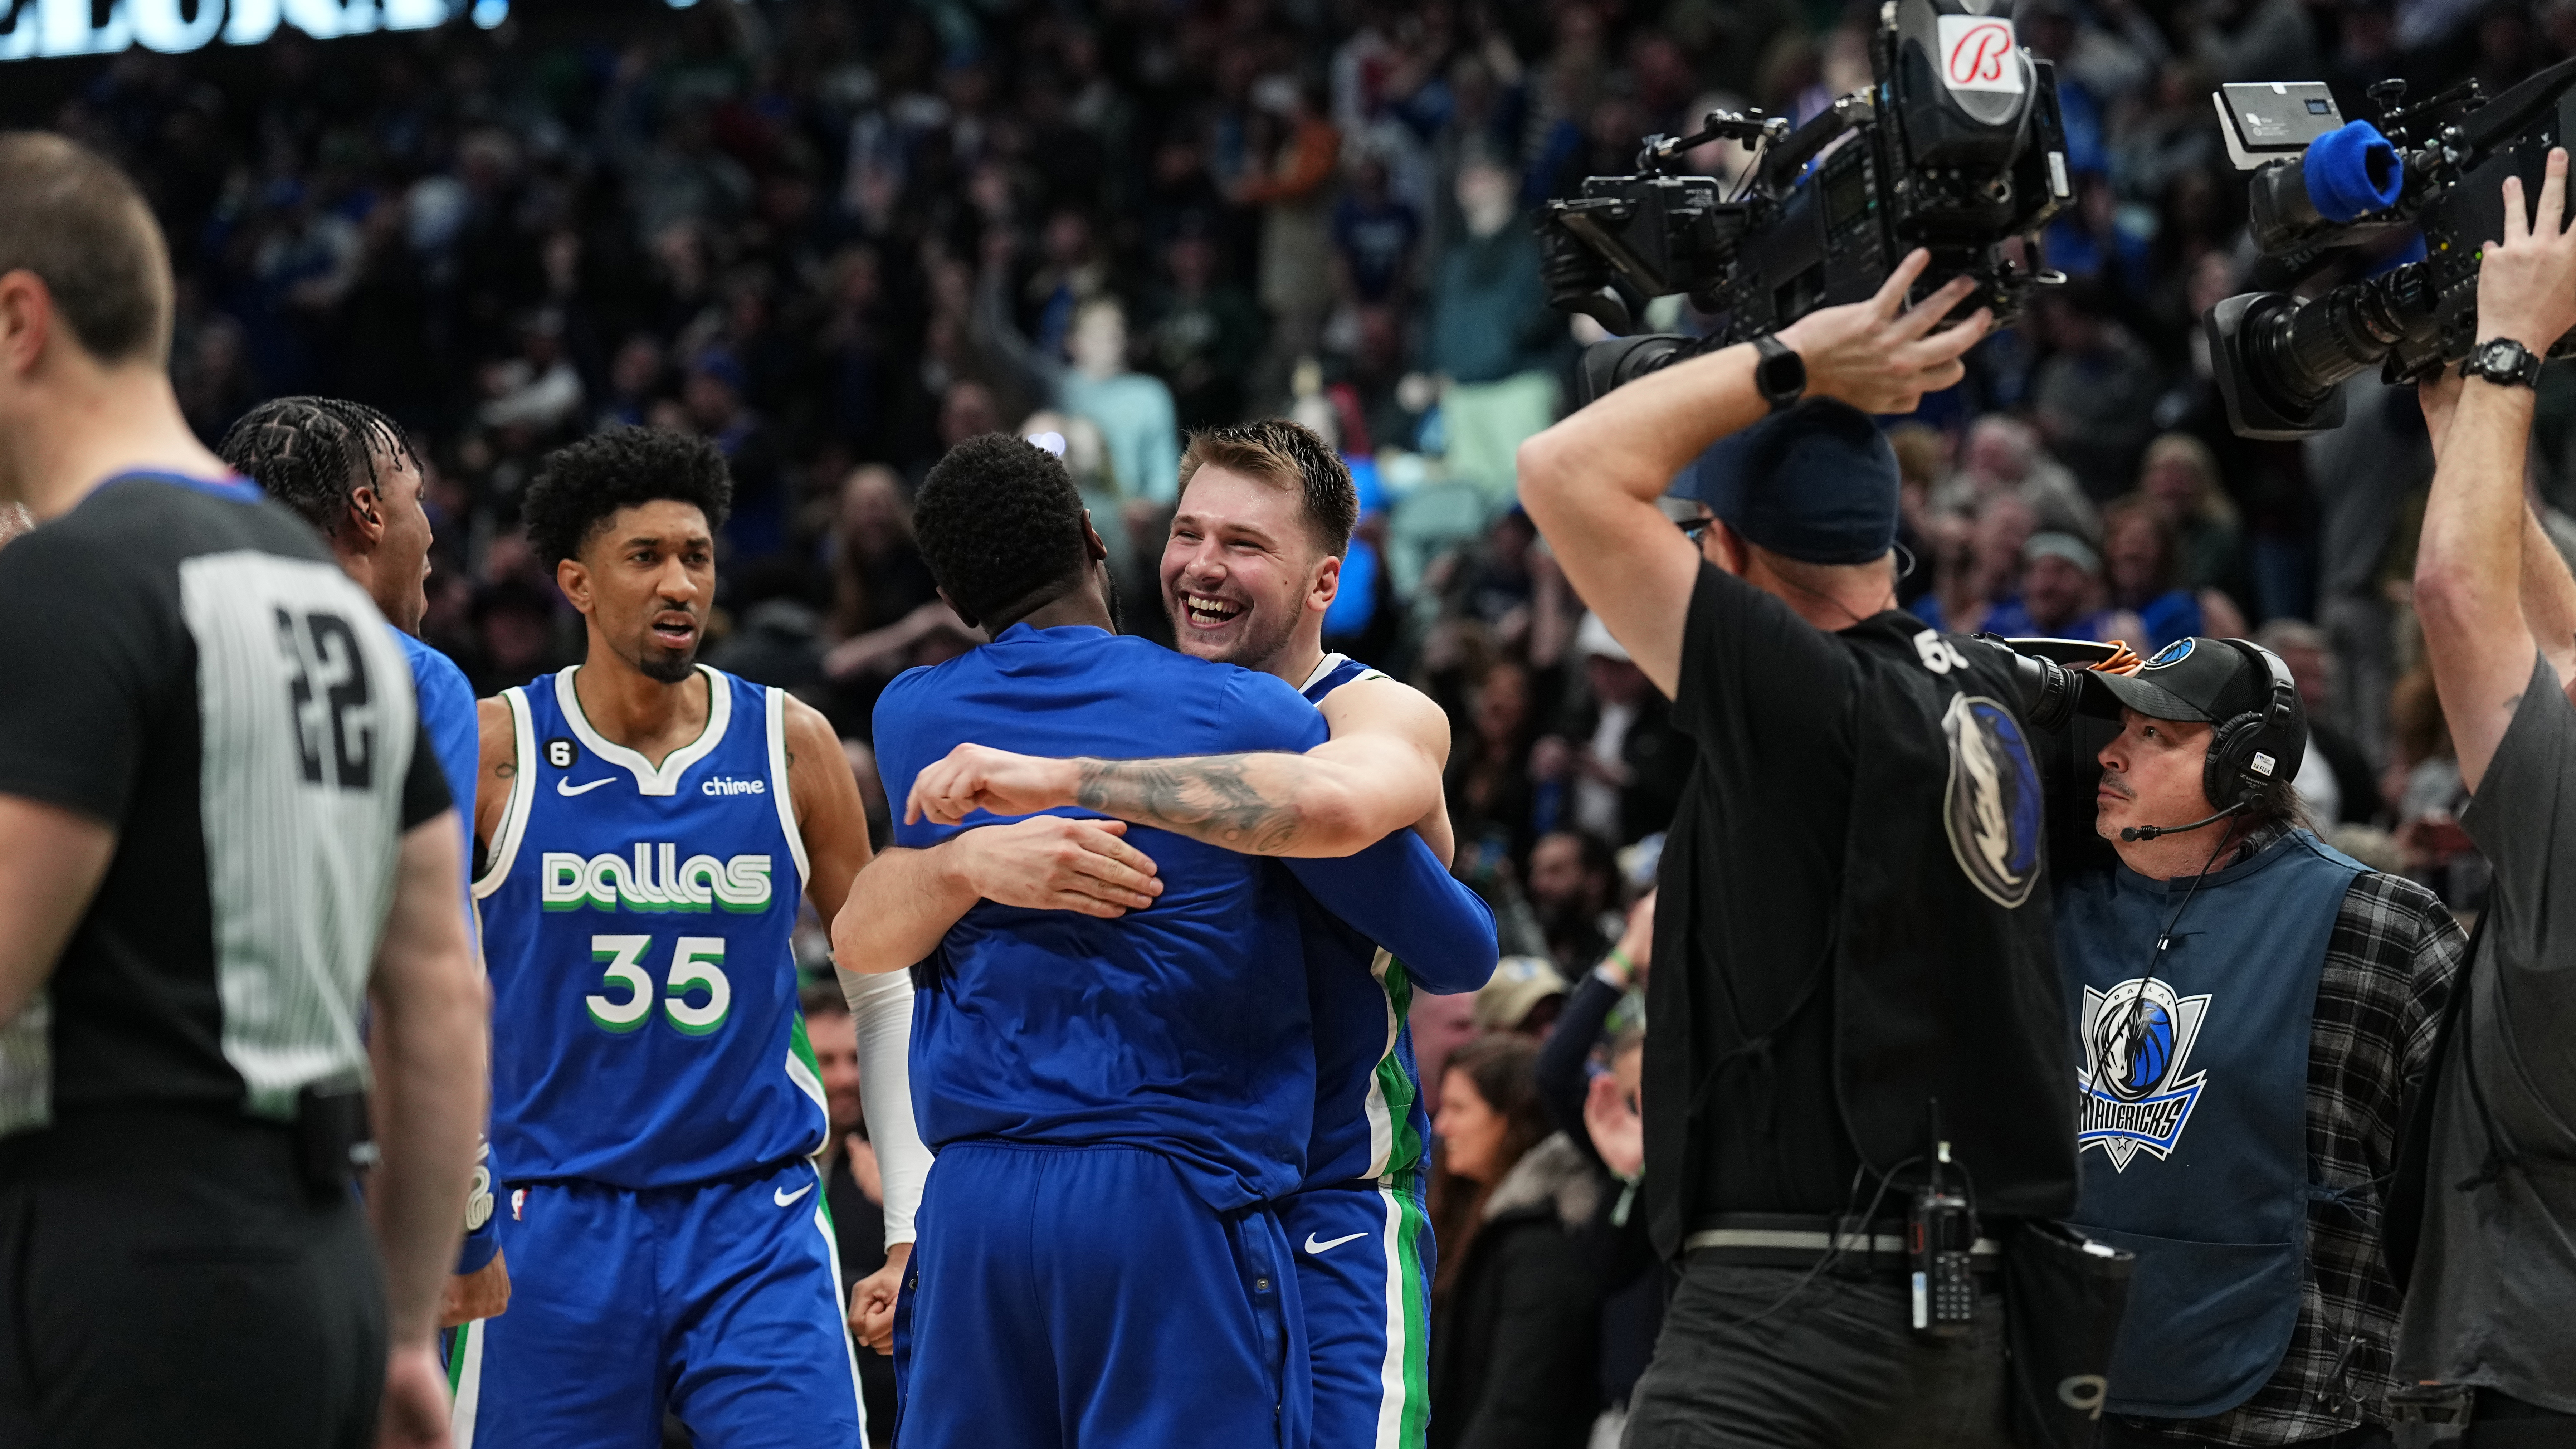 Internet reacts to Luka Doncic's 60-point triple double